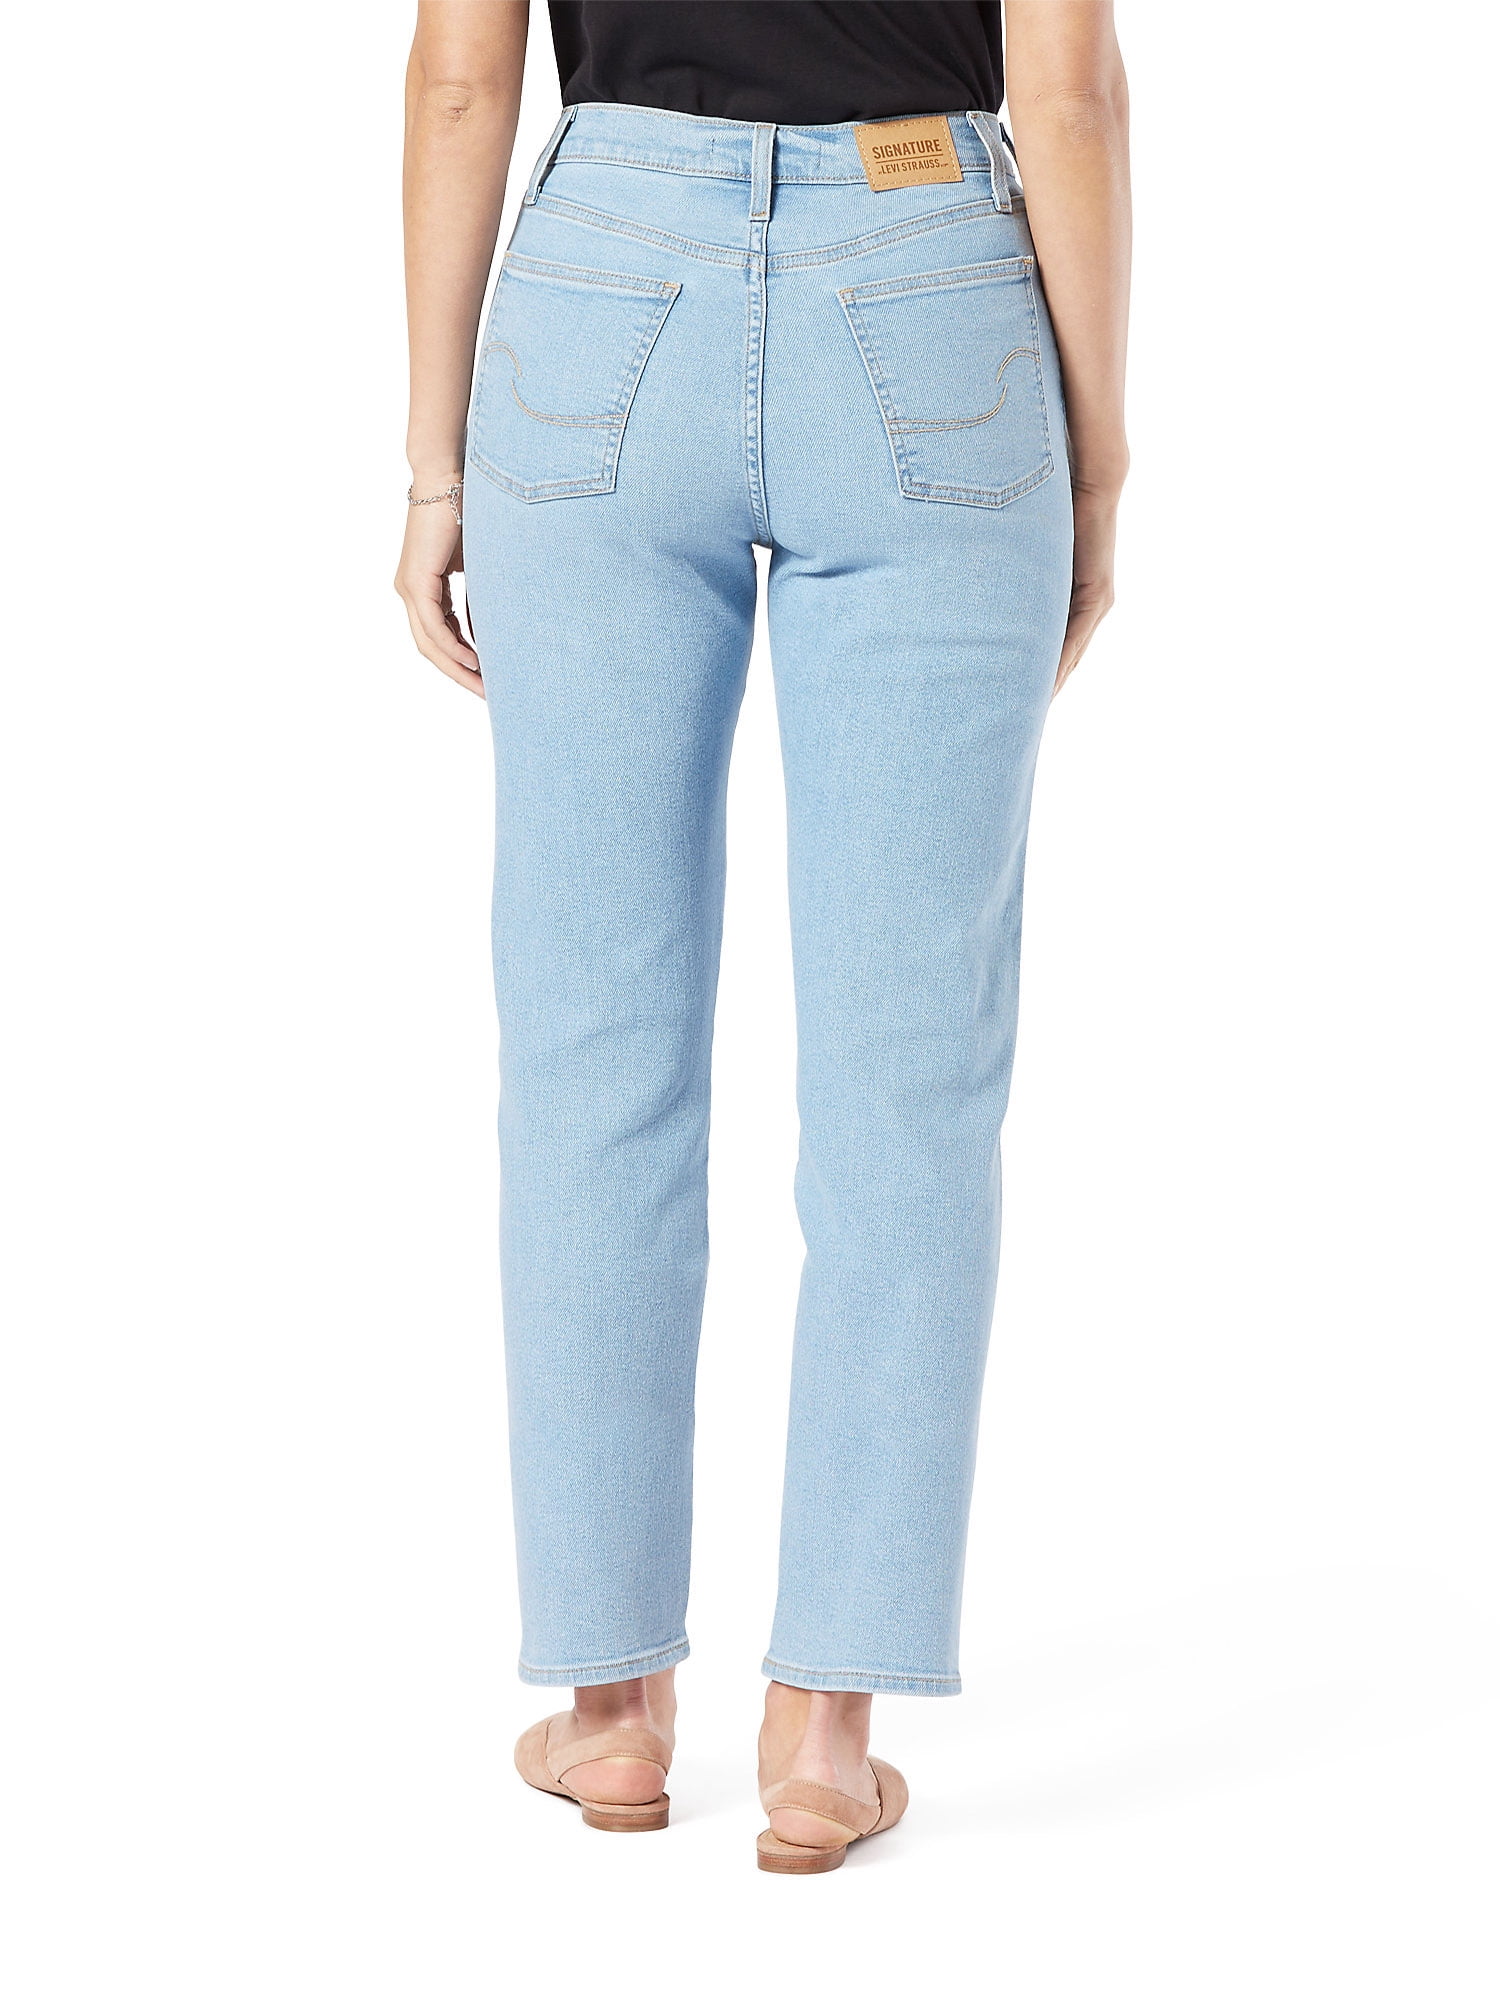 Buy Signature by Levi Strauss & Co.™ Women's Heritage High-Rise ...